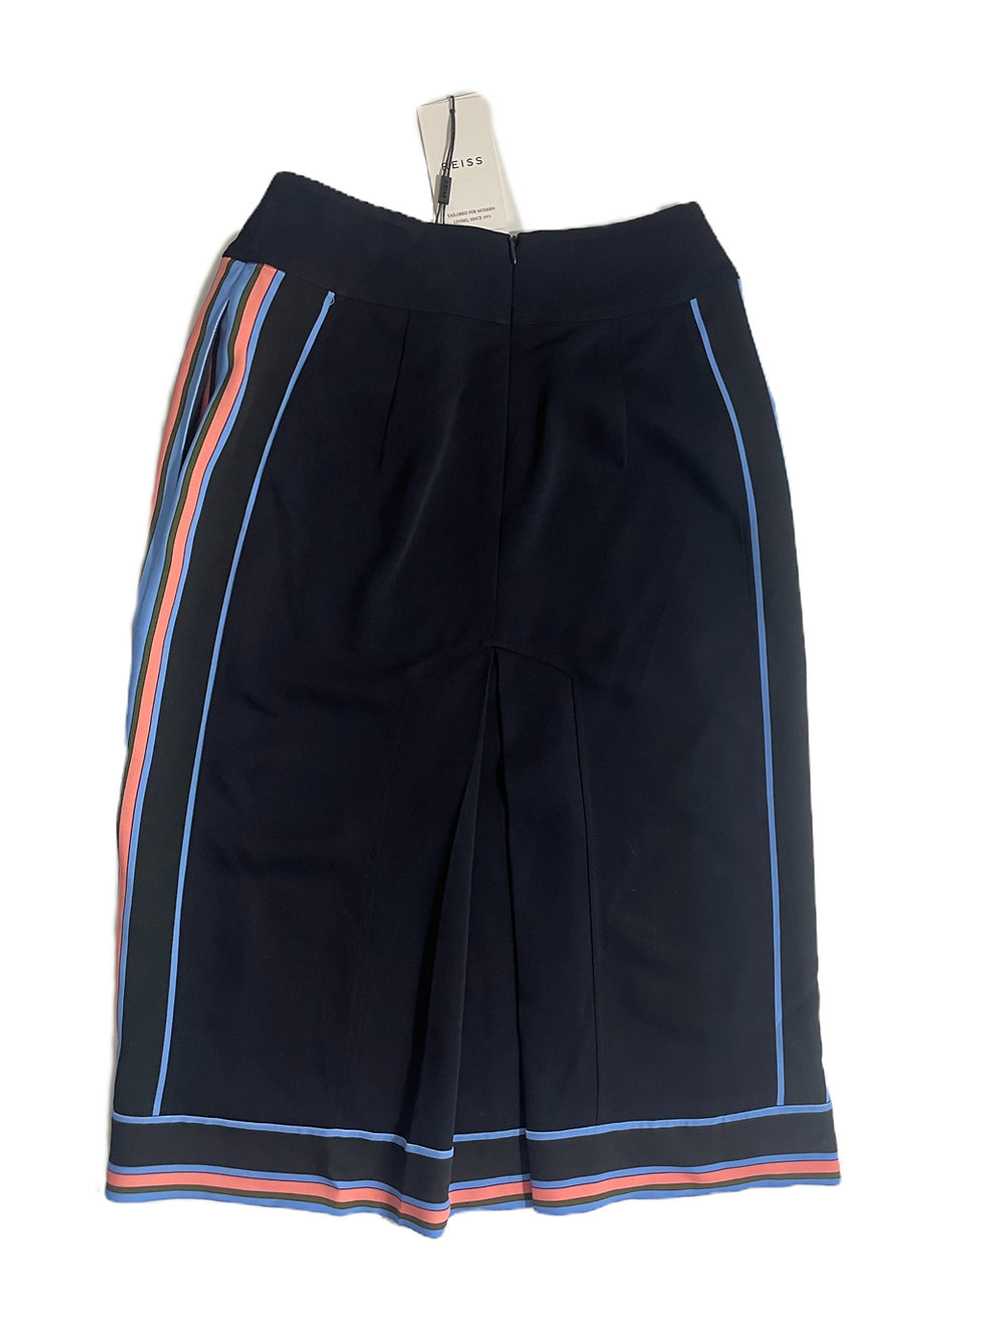 New With Tags Reiss Colour Block Skirt UK 6 - image 3